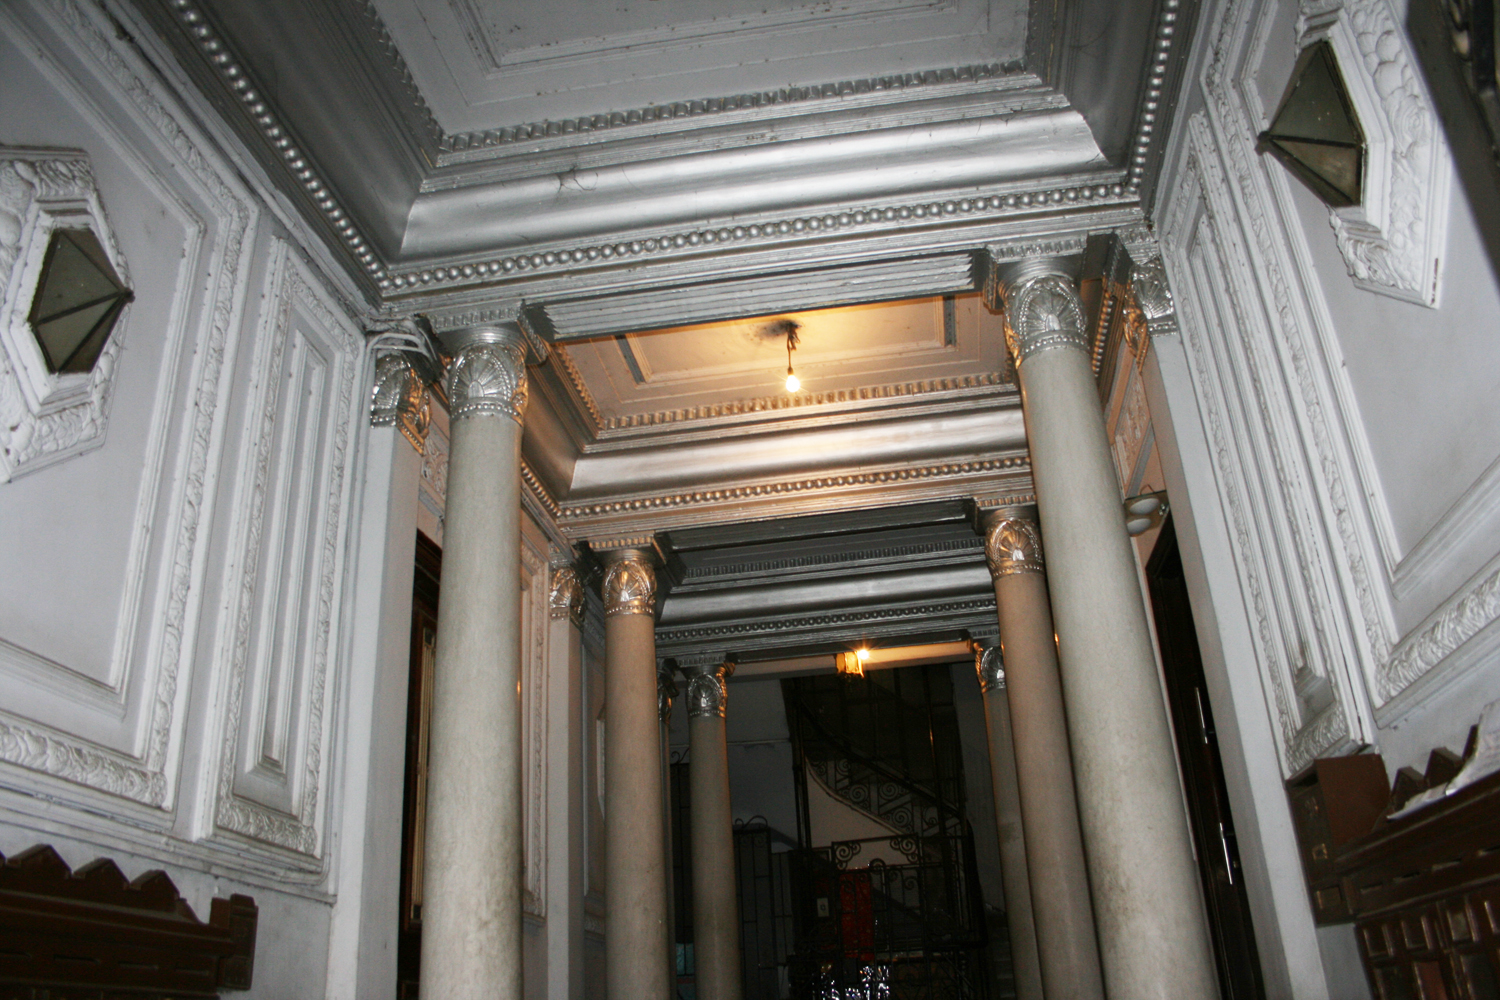 View of the interior hall